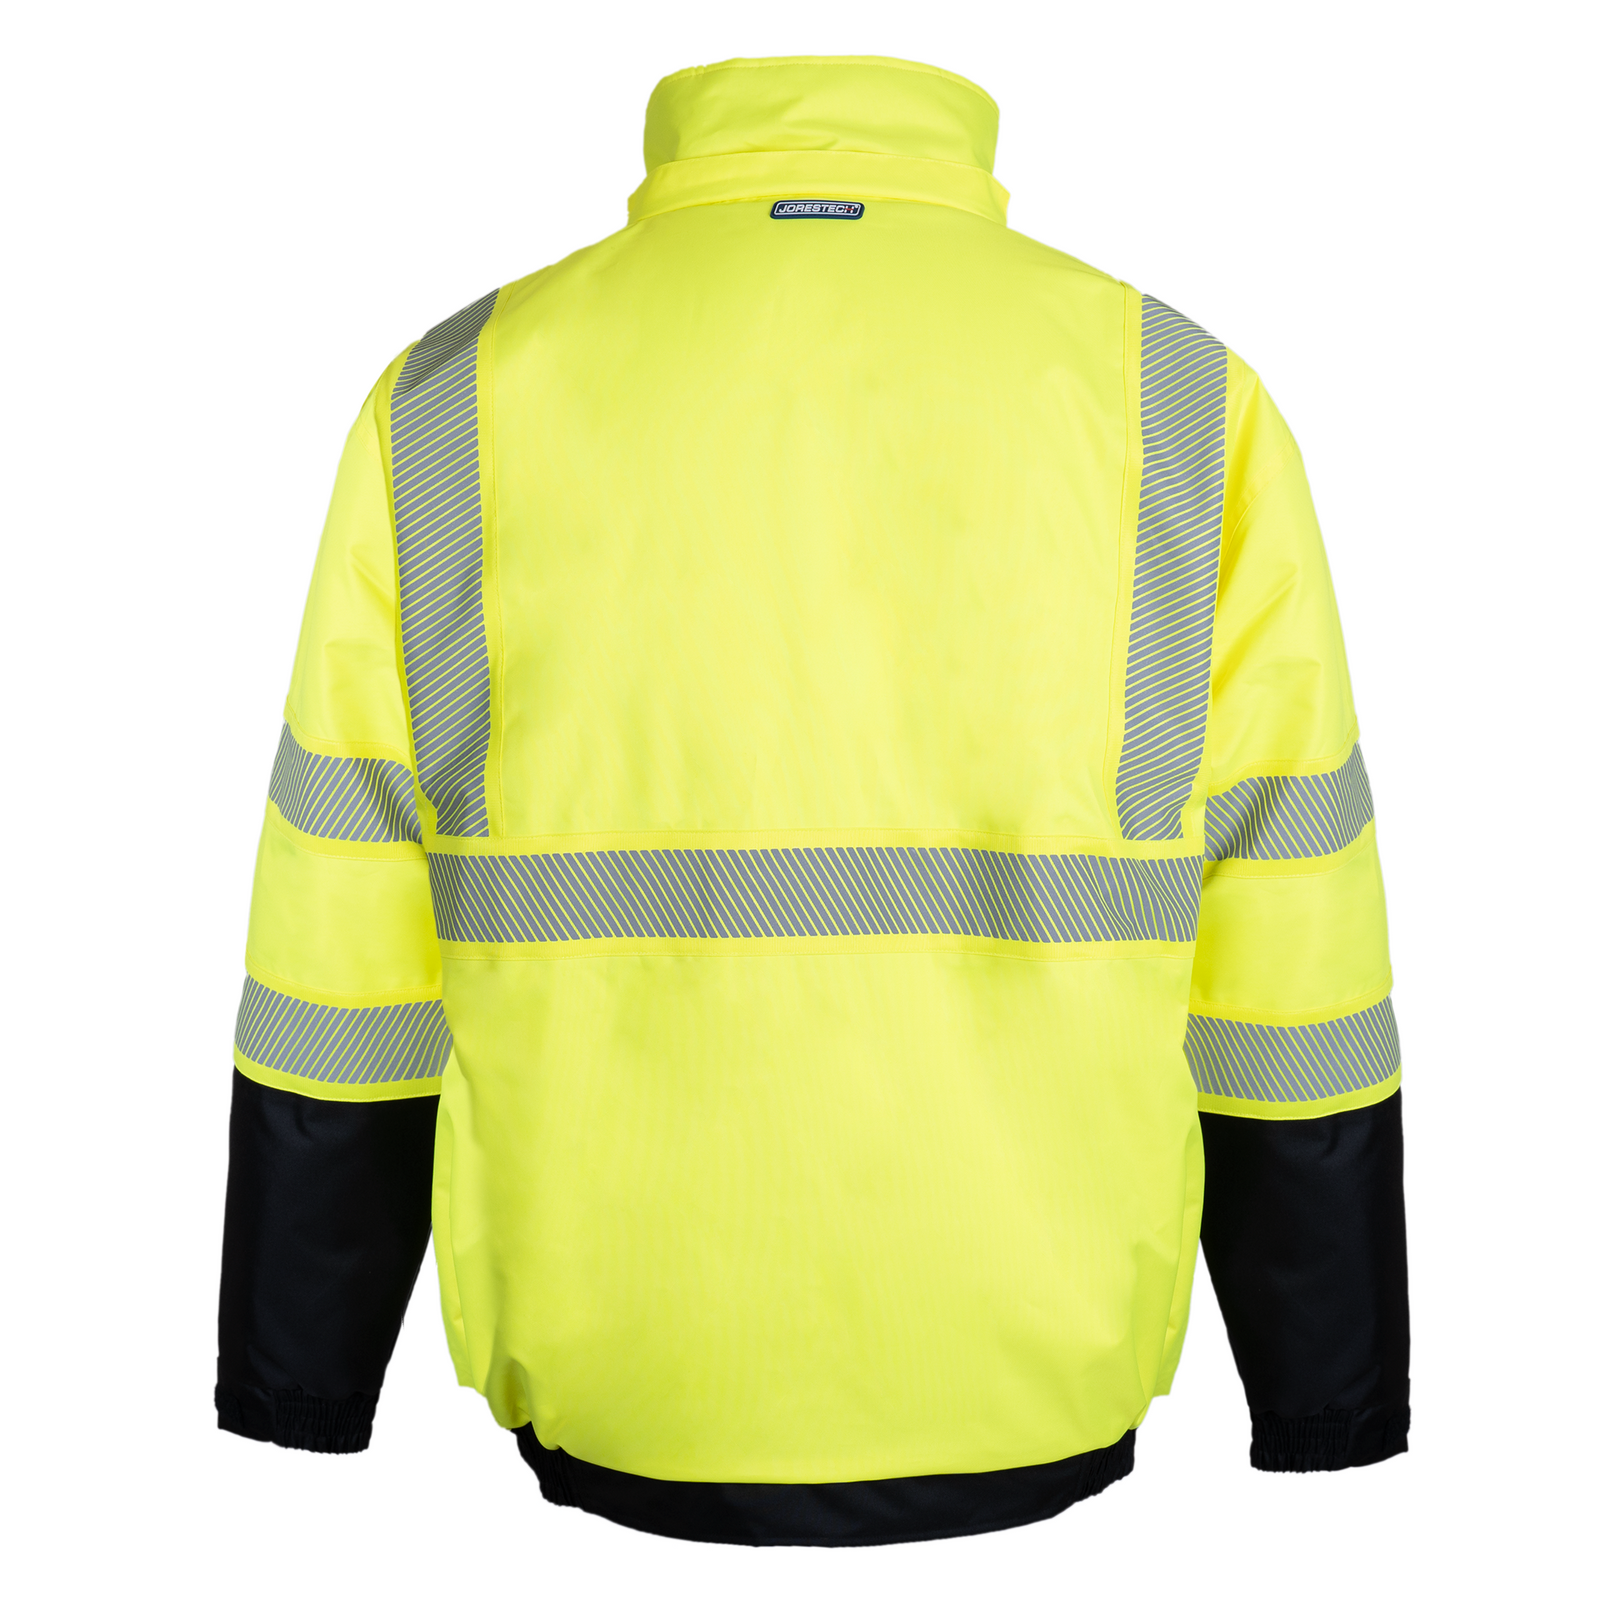 Back view of the ANSI compliant yellow and black Hi-vis safety jacket with heat transfer reflective tapes and removable hoodie for road work